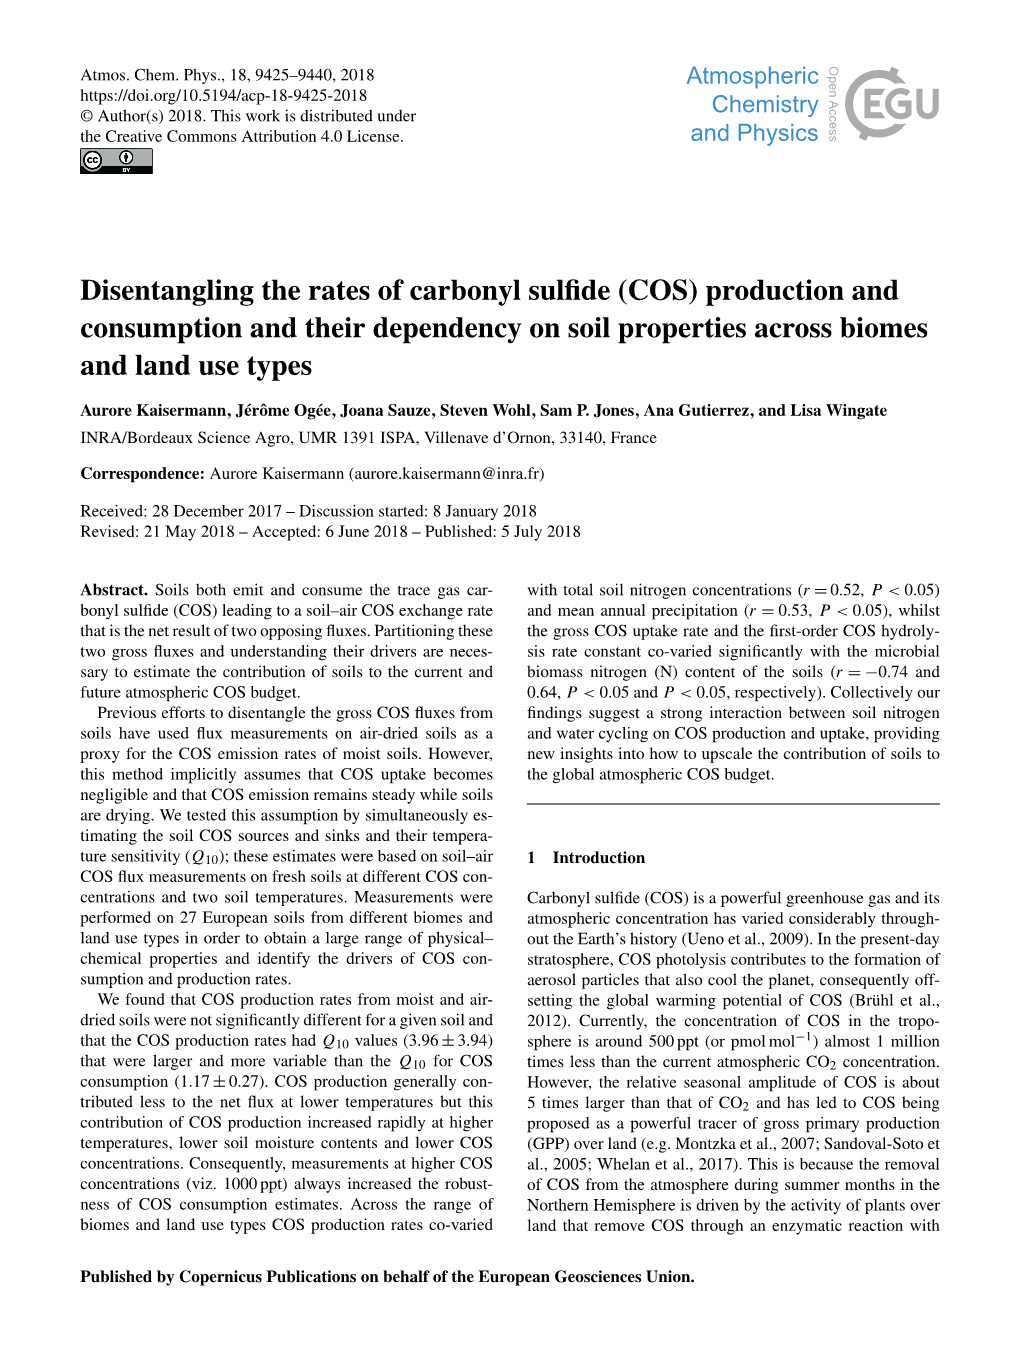 Disentangling the Rates of Carbonyl Sulfide (COS) Production And